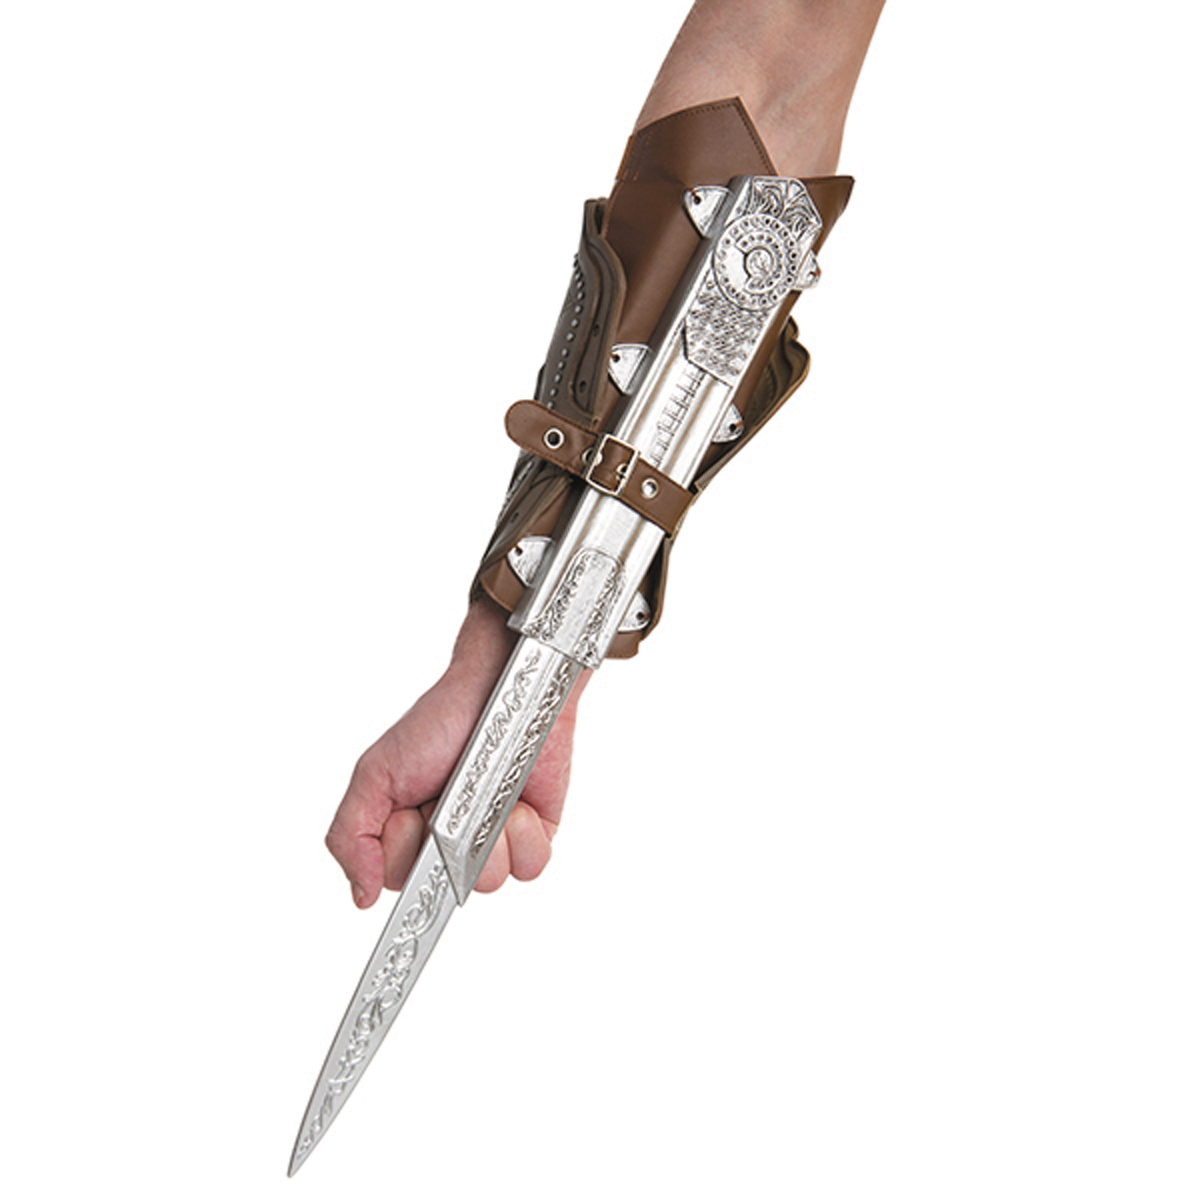 Assassin's Creed Costume With Real Bladed Weapons Turns You Into